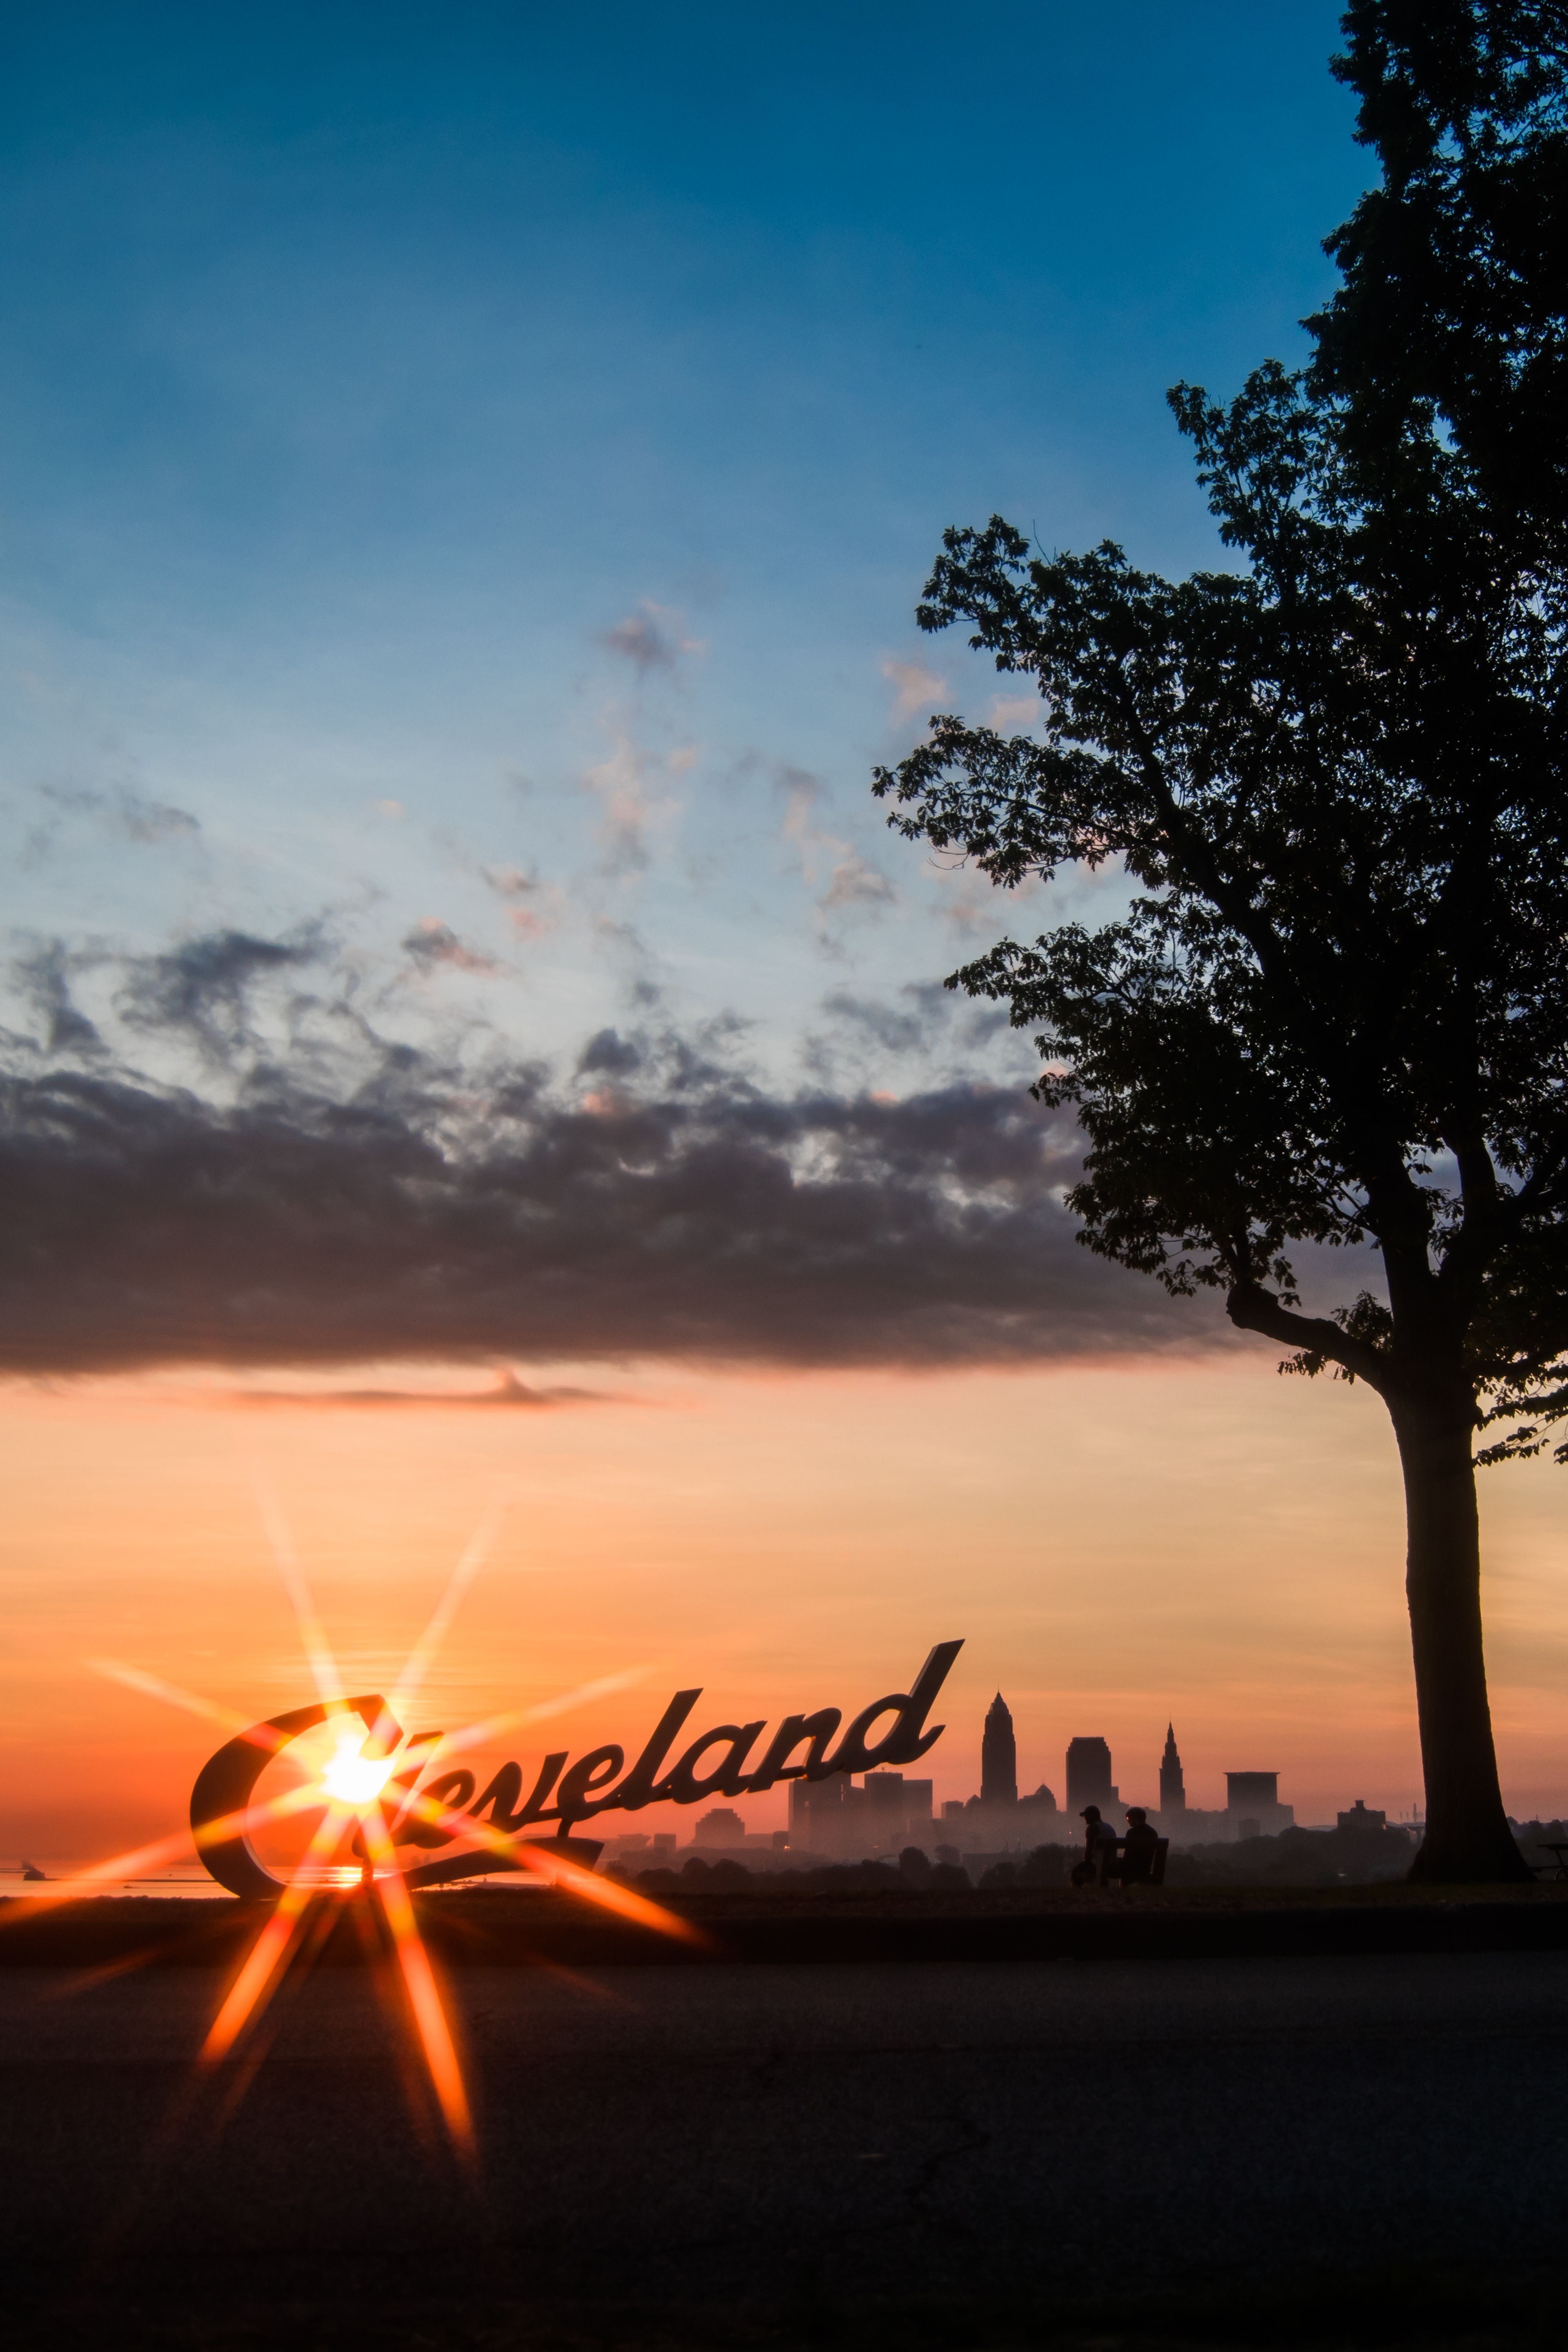 cities, sunset, silhouettes, night city, inscription, sunlight, cleveland mobile wallpaper